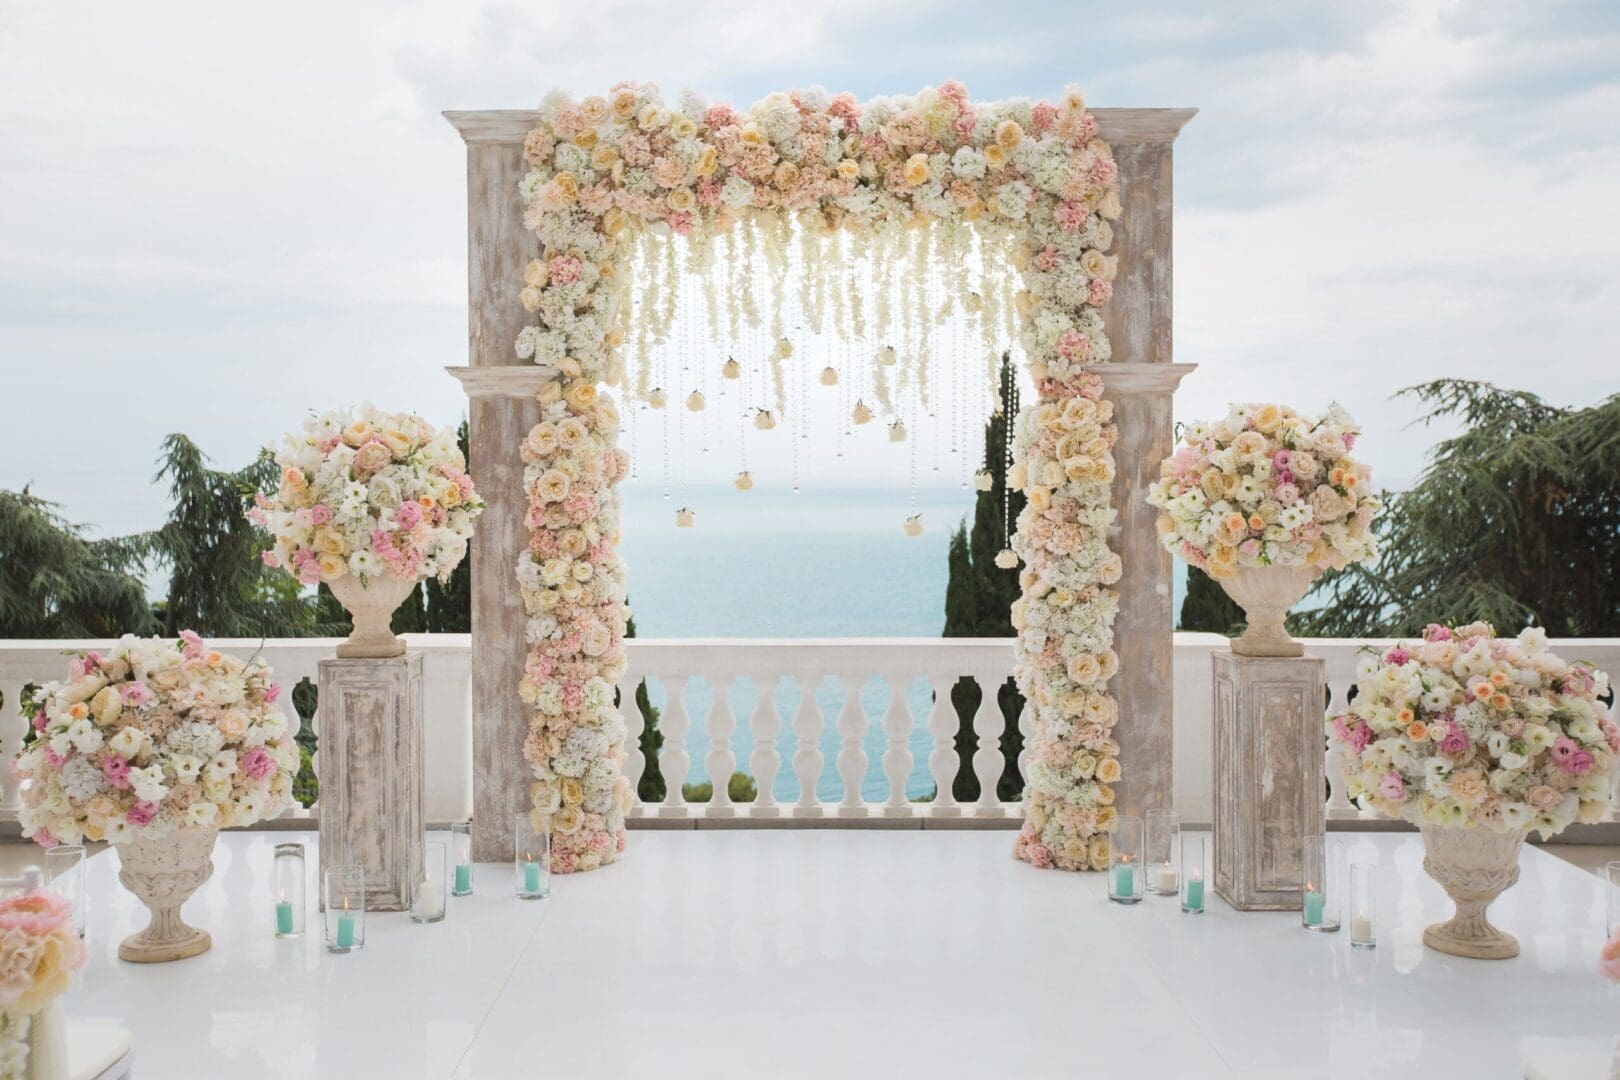 A wedding ceremony set up with flowers and vases.